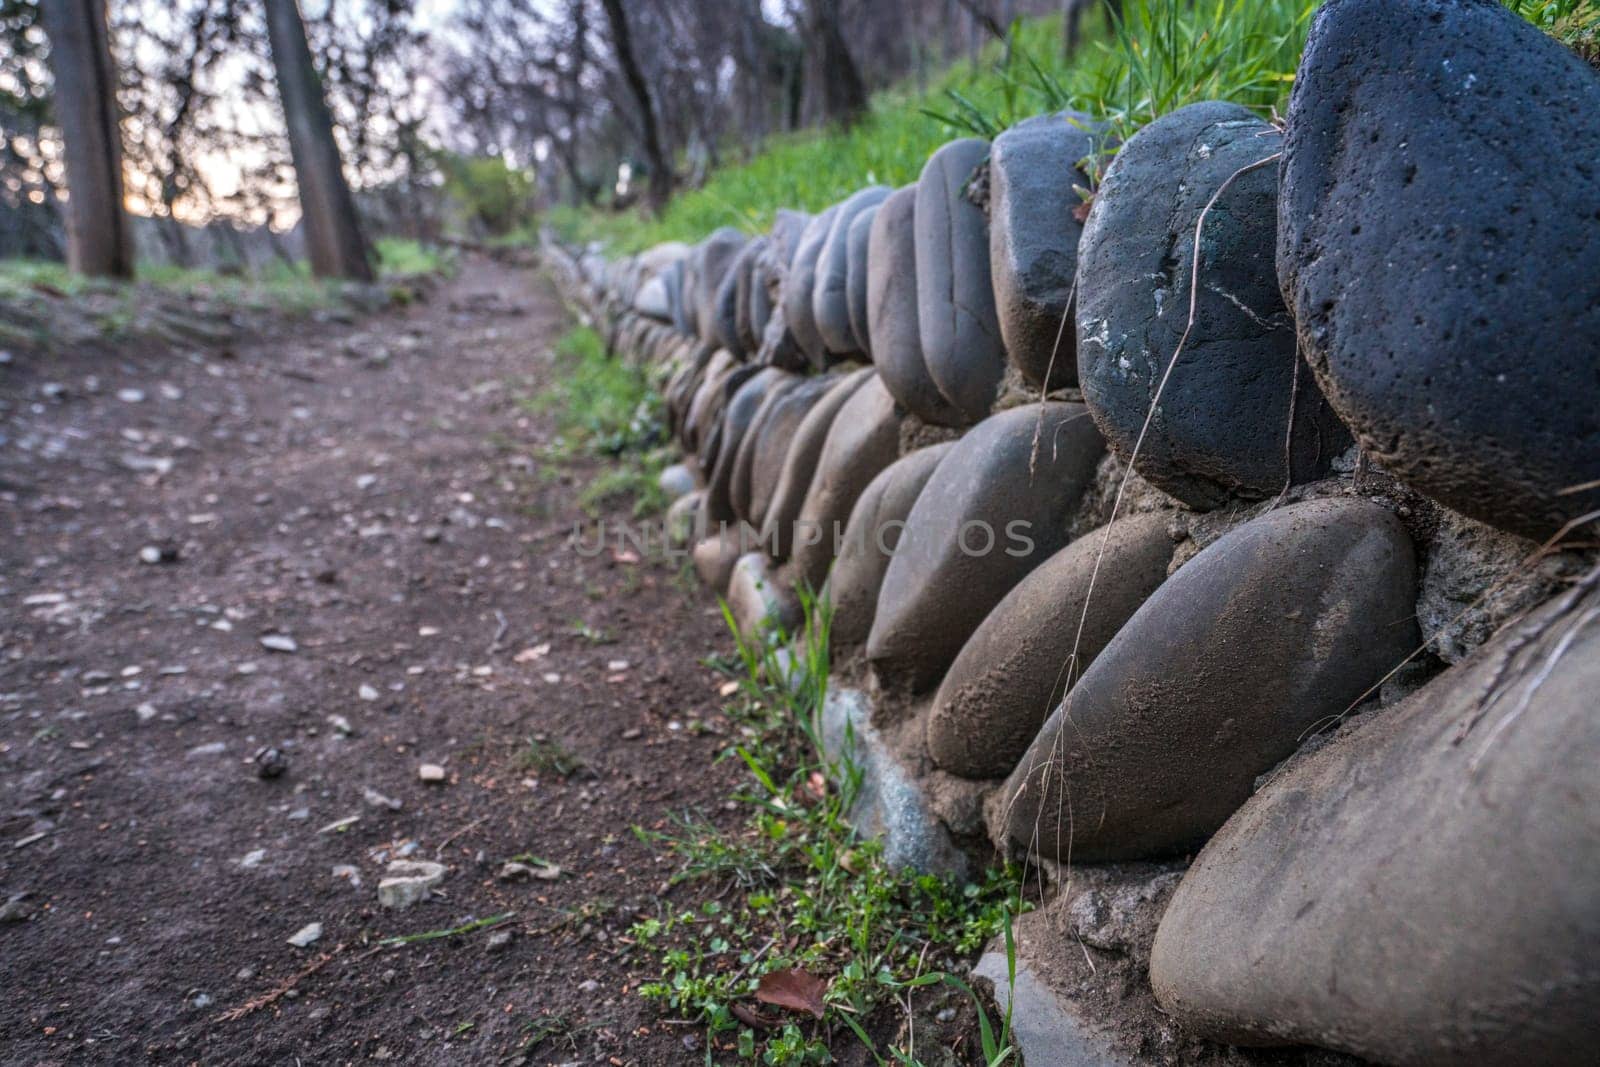 In park. Image of border paved with stones, close-up